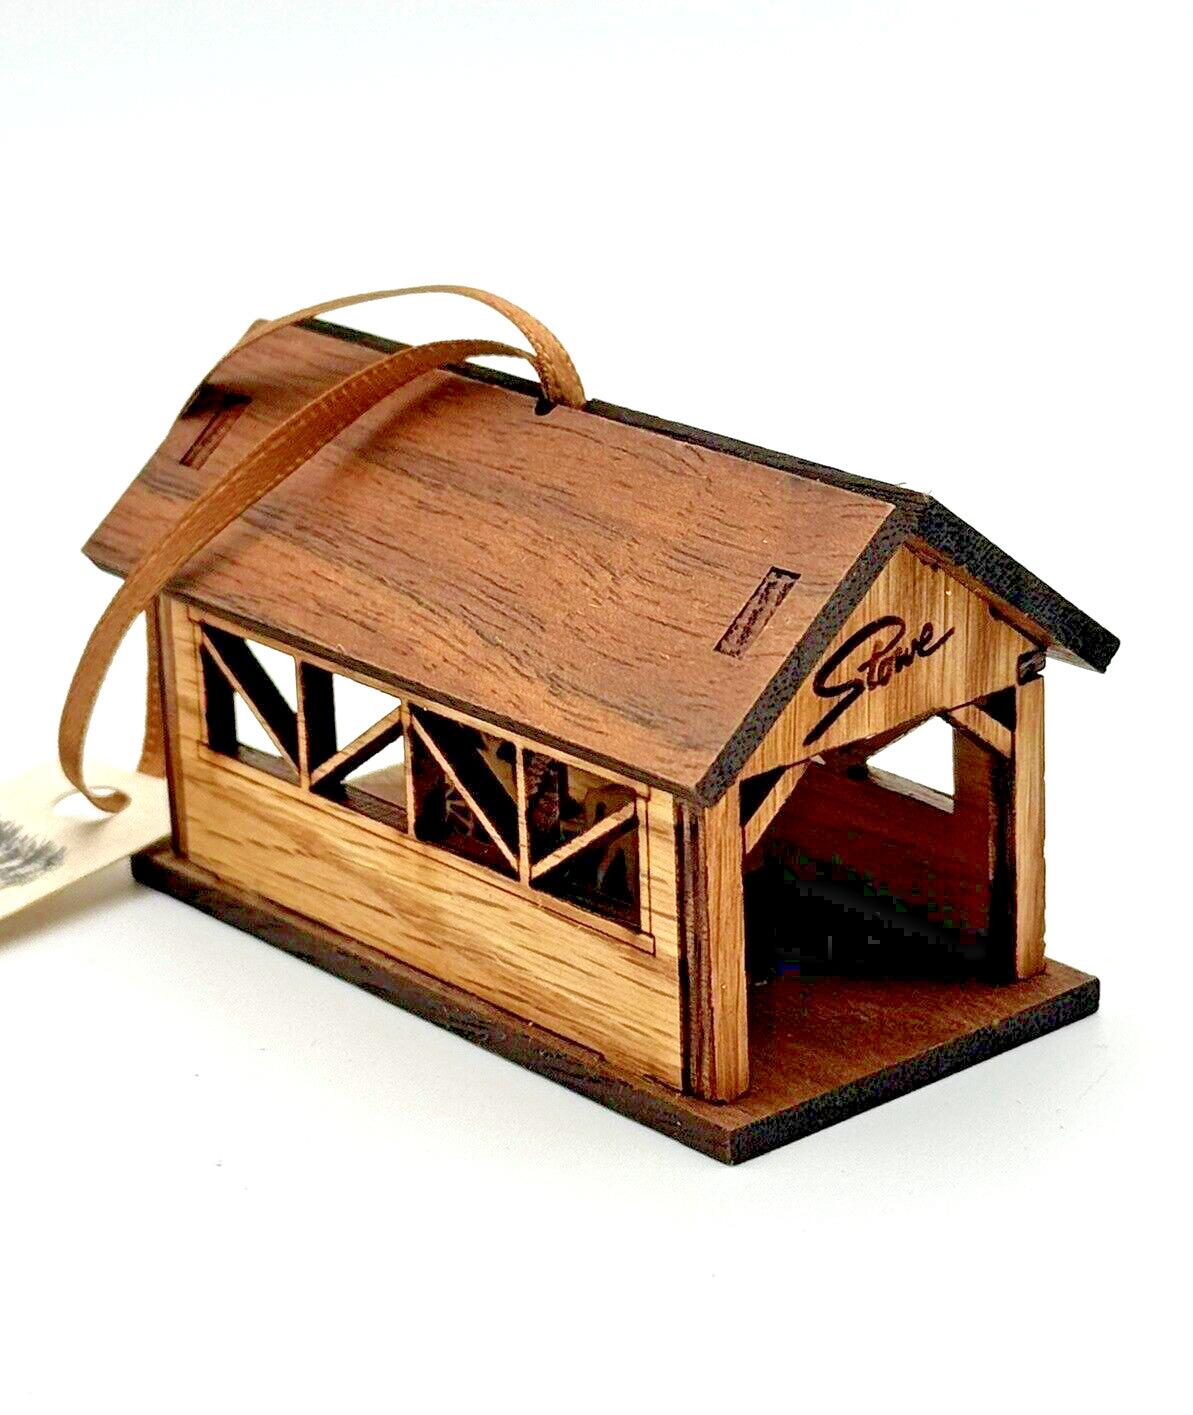 Stowe Vermont Souvenir Wood Covered Bridge with Horse Carriage Ornament 3